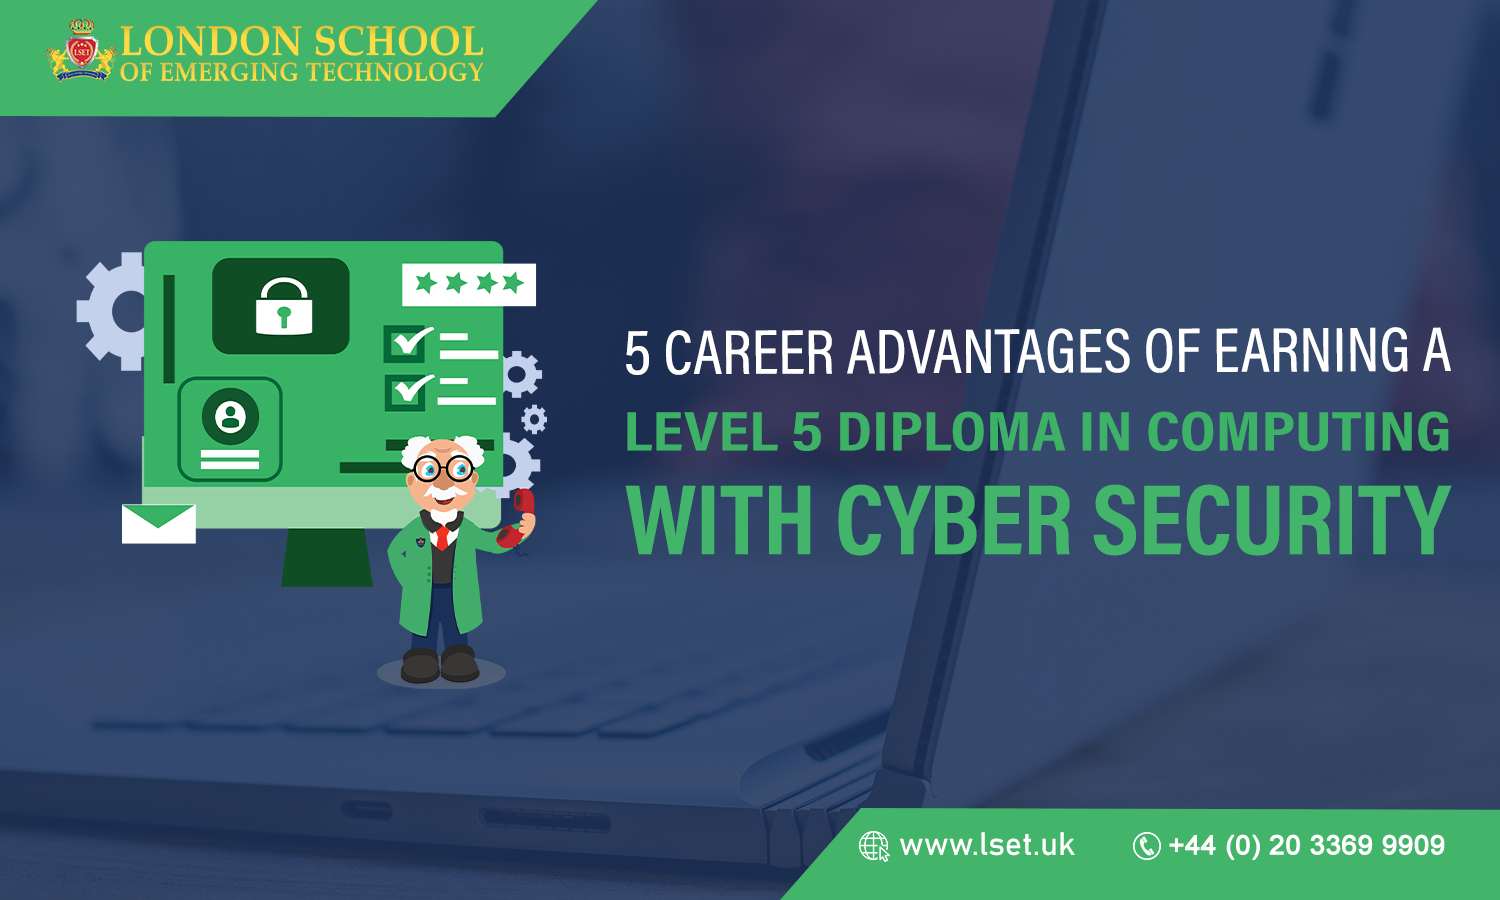 5 Career Advantages of Earning a Level 5 Diploma in Computing with Cyber Security